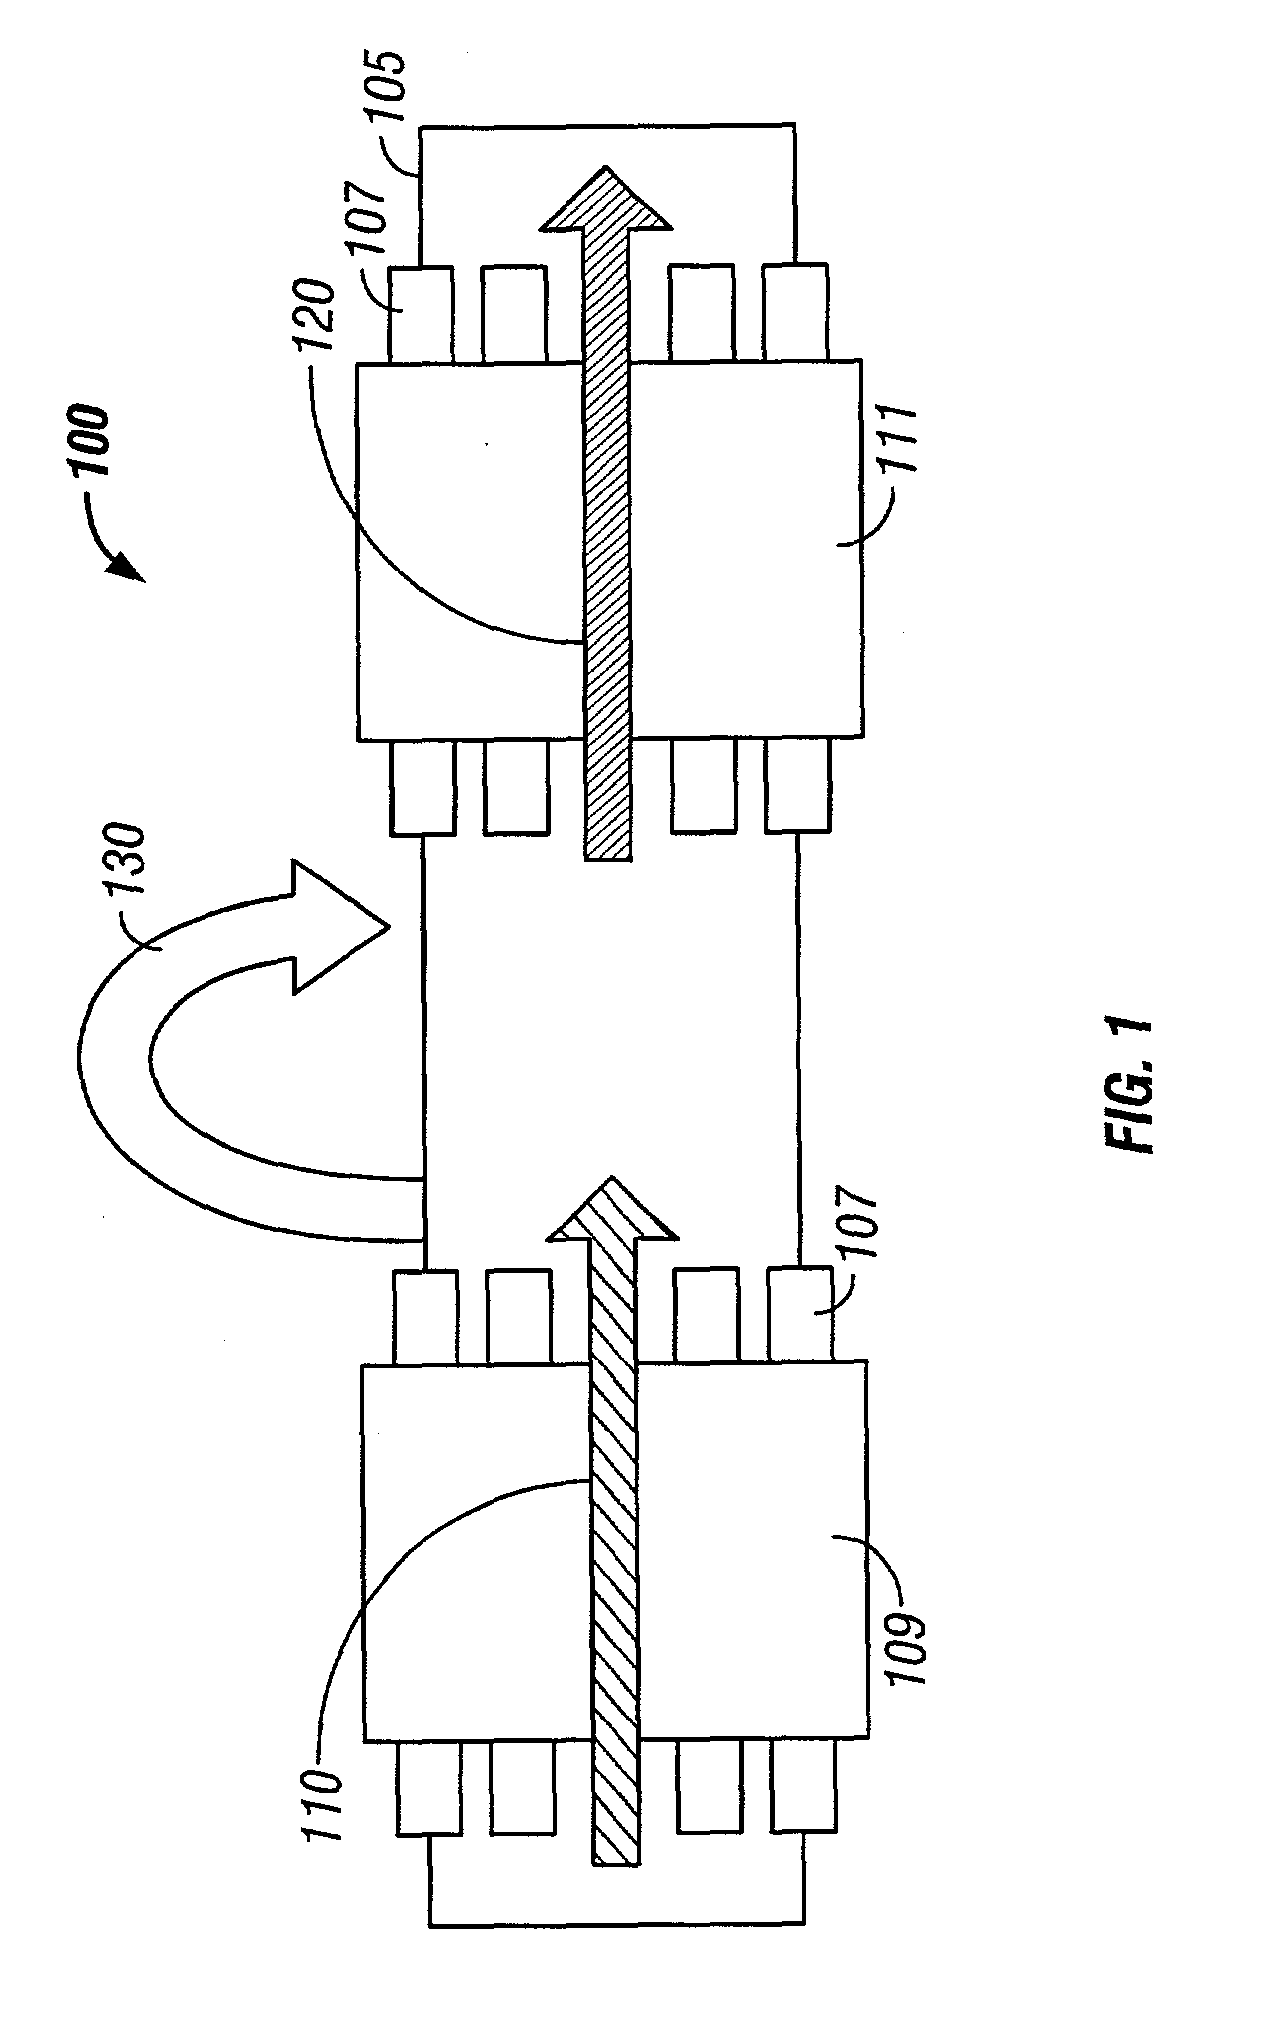 Method and apparatus for a multi-component induction instrument measuring system for geosteering and formation resistivity data interpretation in horizontal, vertical and deviated wells